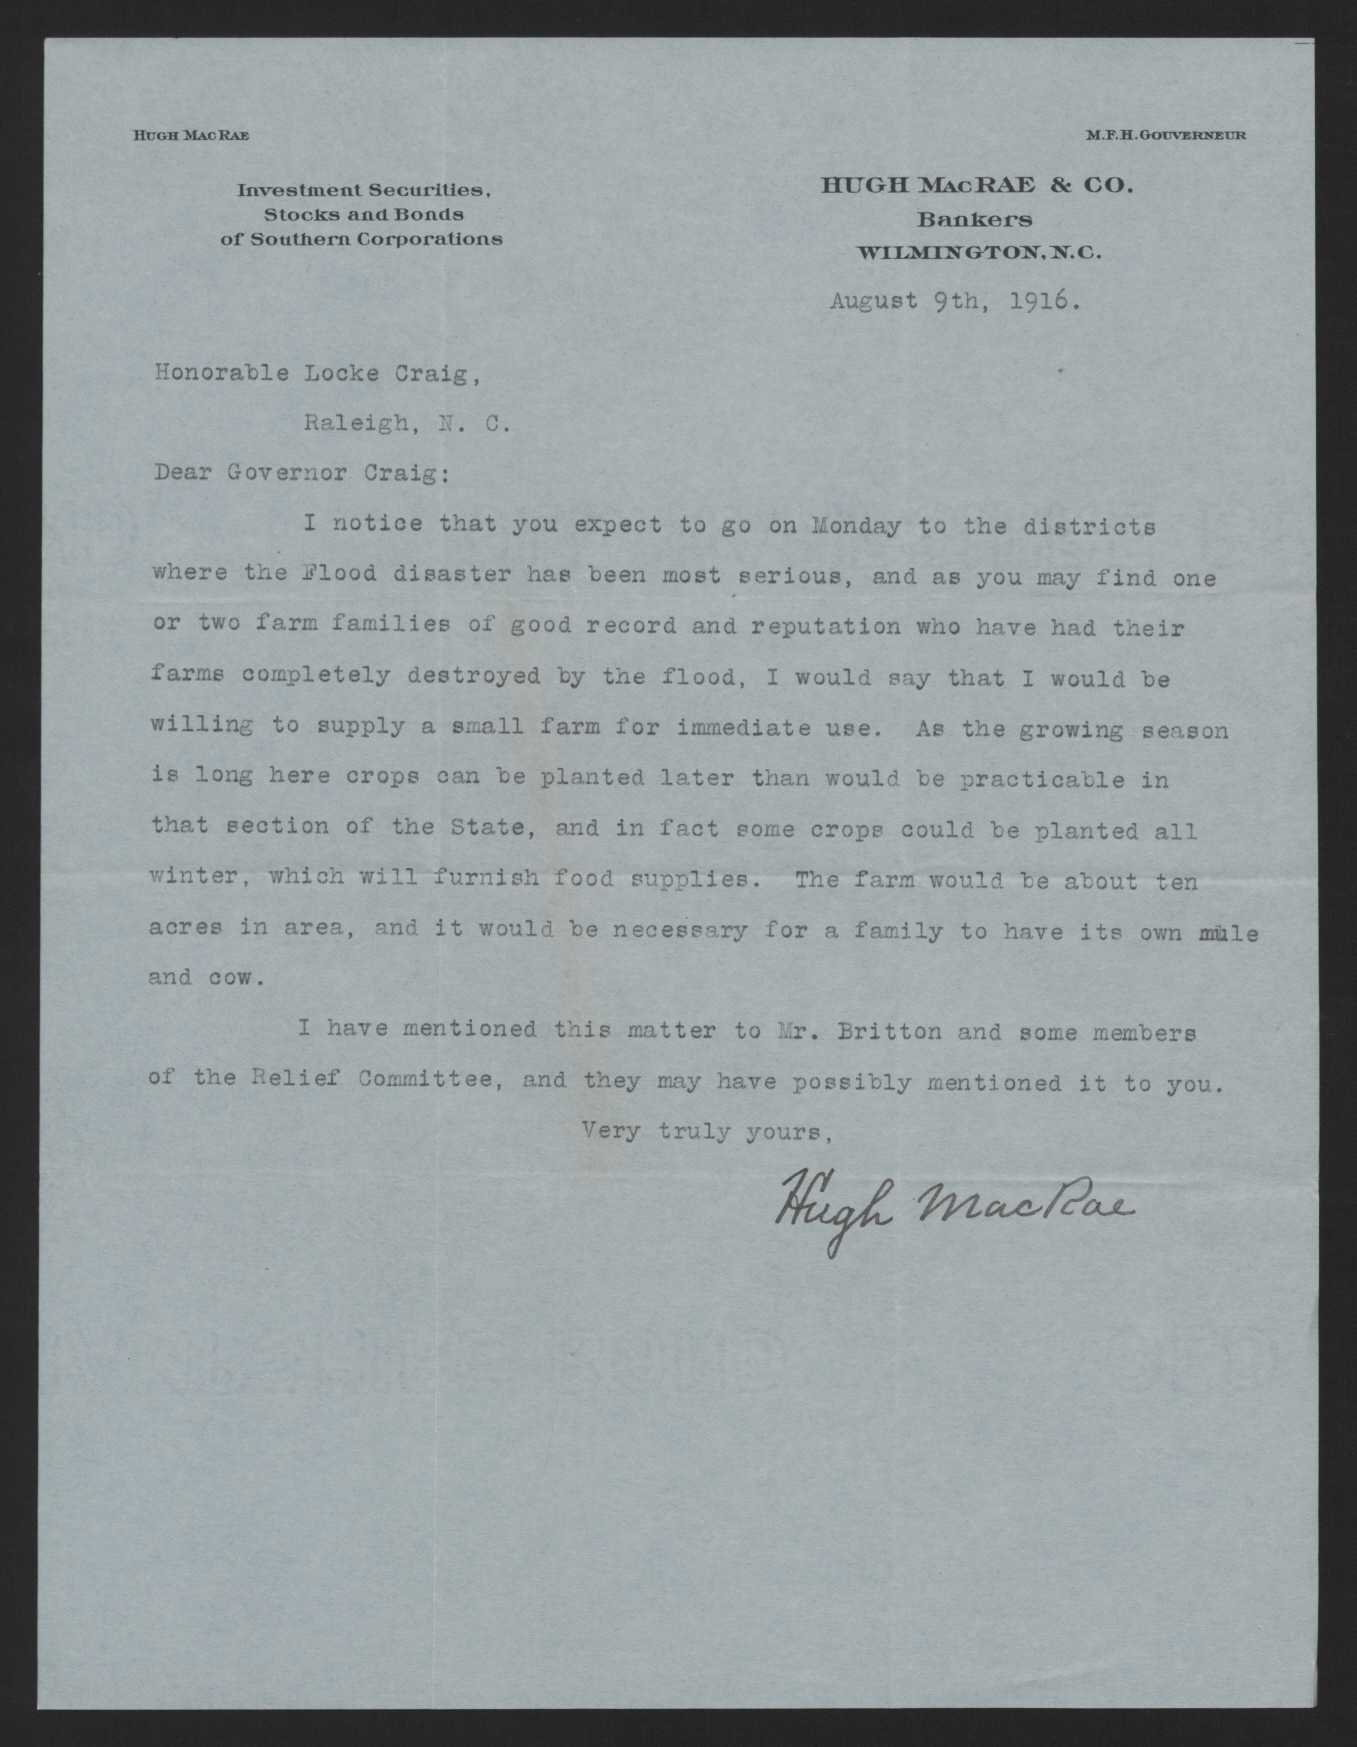 Letter from MacRae to Craig, August 9, 1916